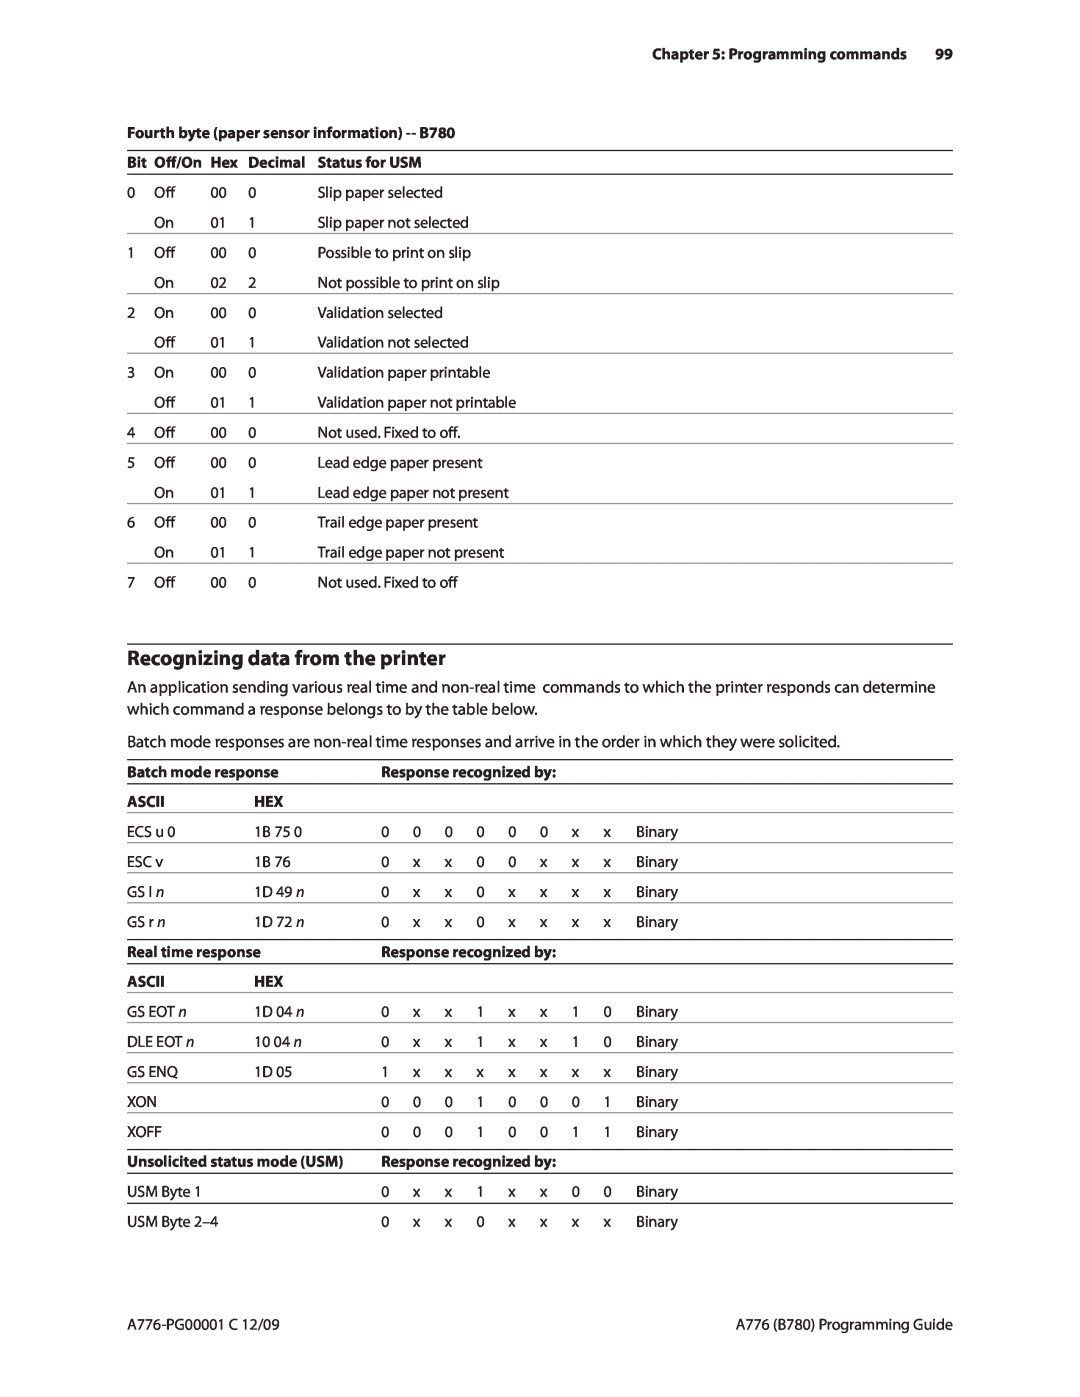 Cognitive Solutions A776, B780 manual Recognizing data from the printer 